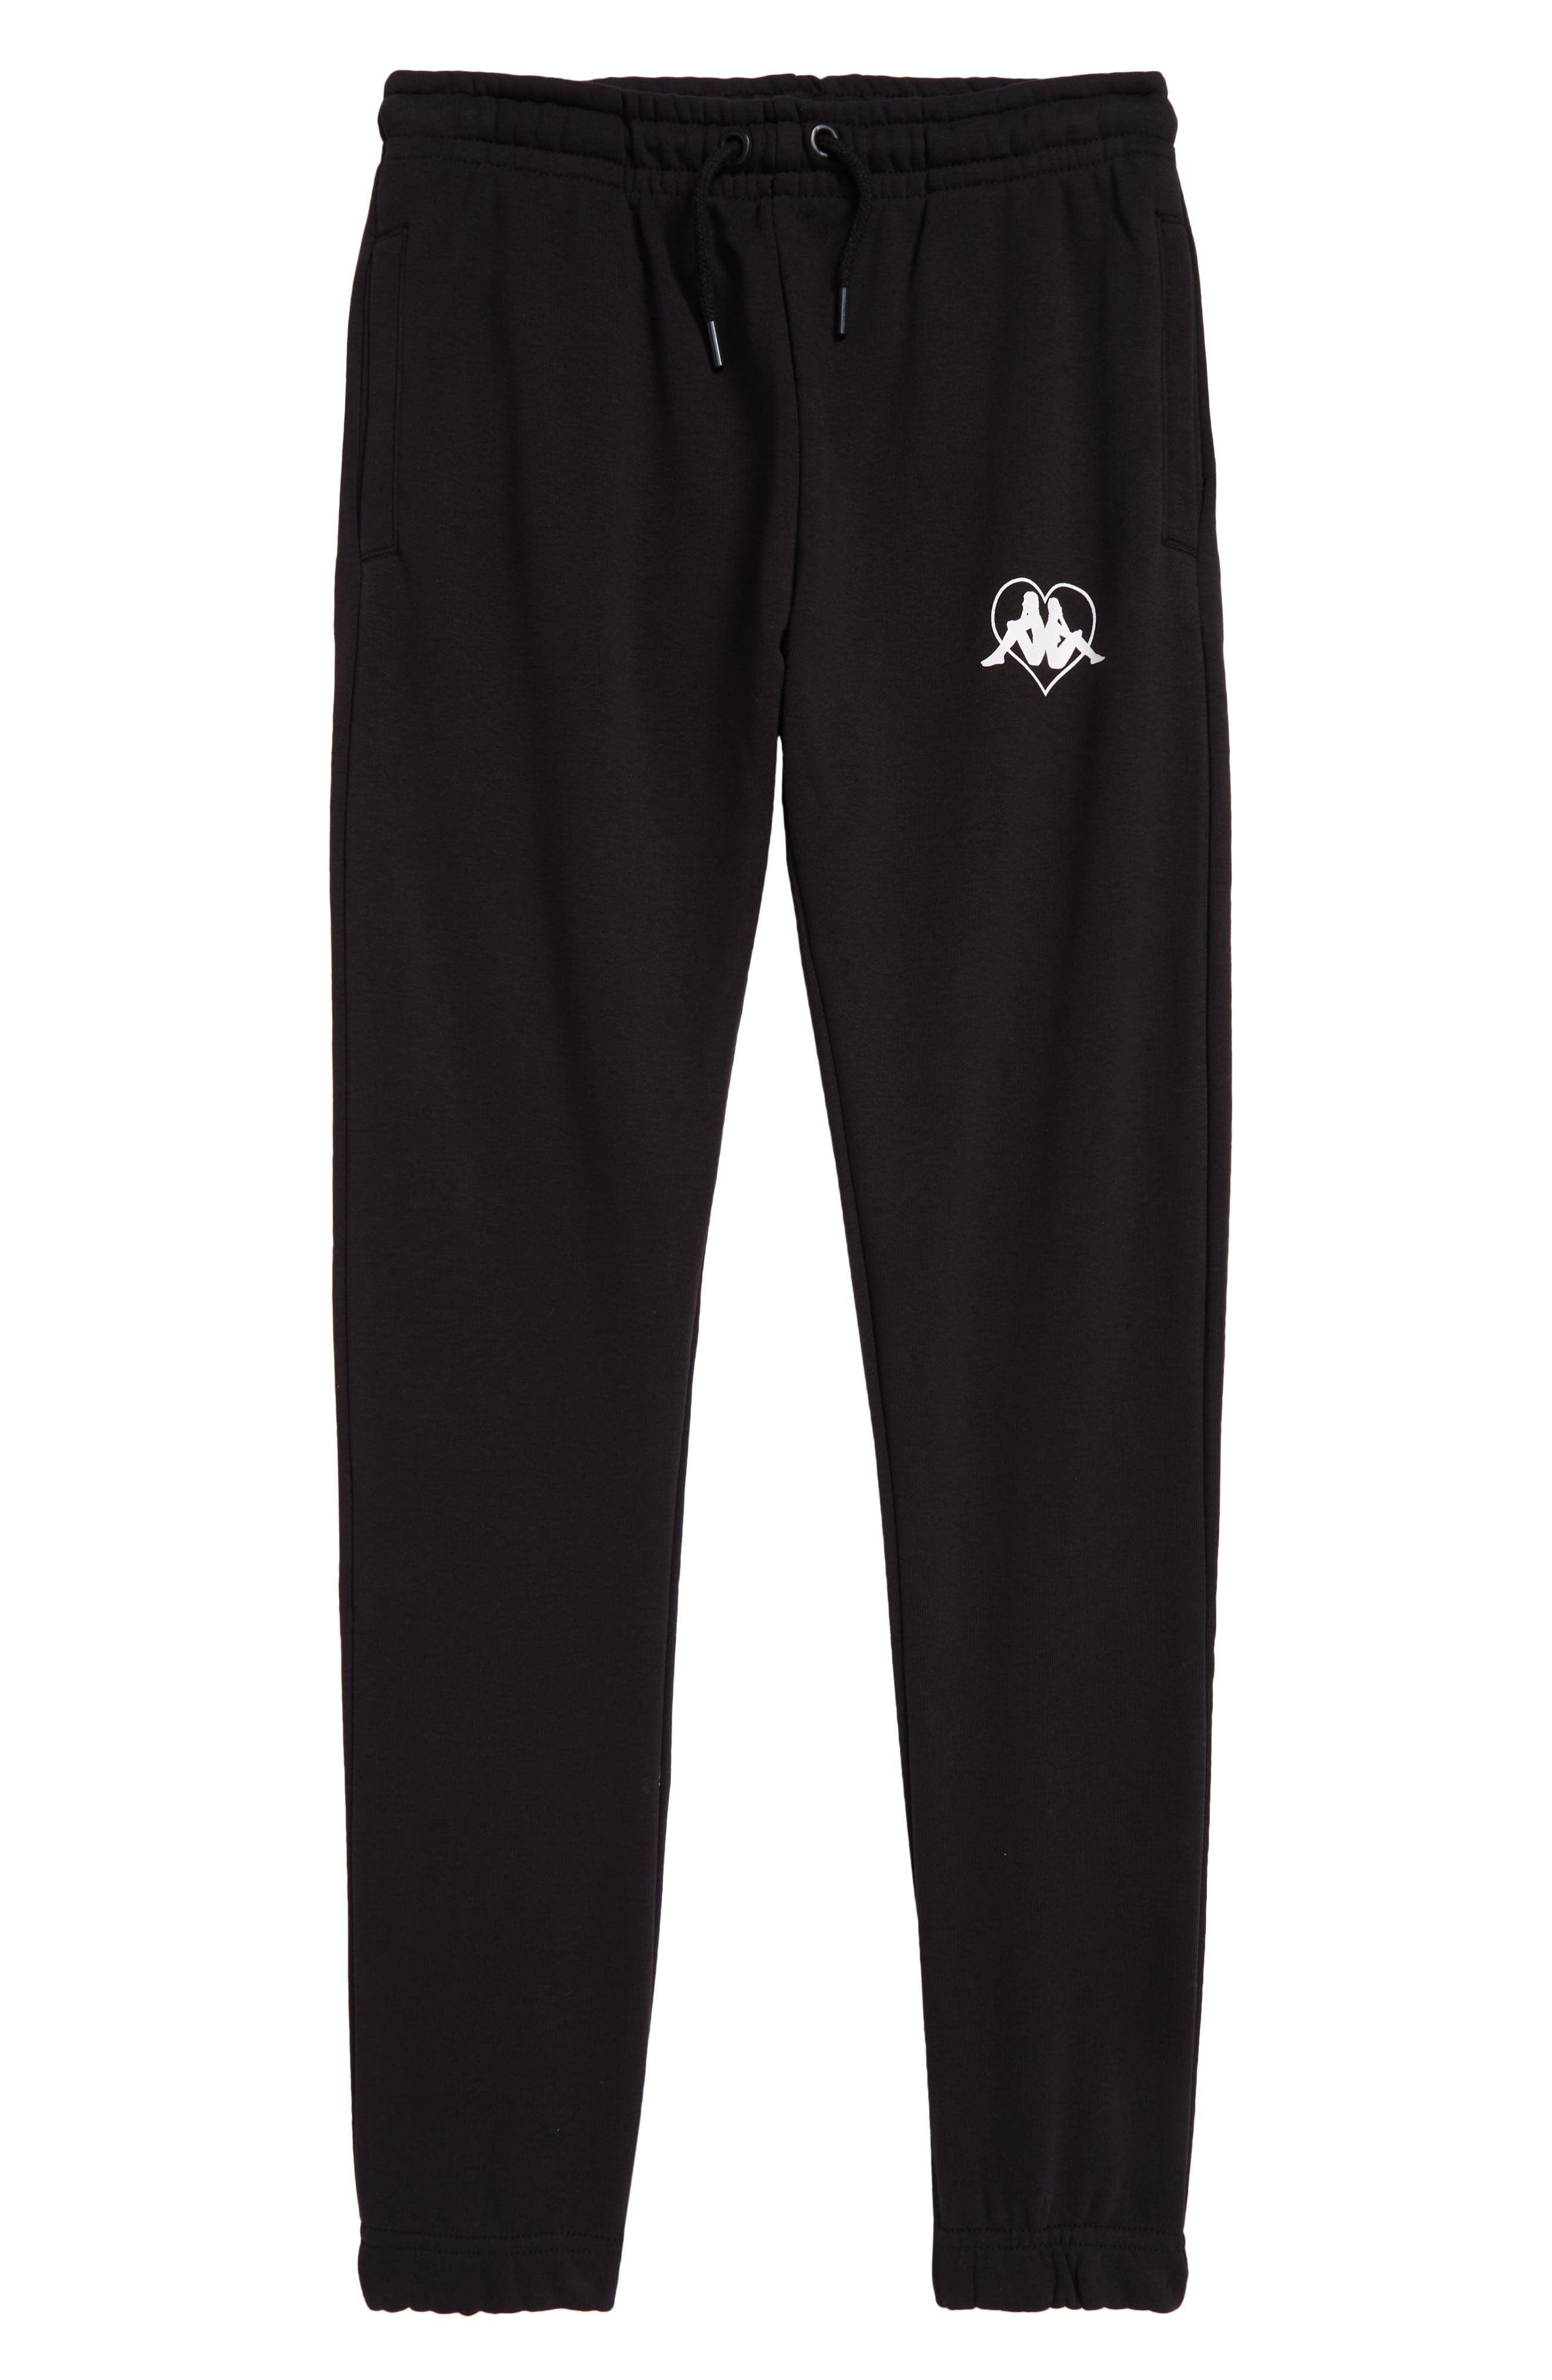 Kappa Kids' Authentic Katowice Track Pants in Black Smoke-White Bright at Nordstrom, Size 12Y Us